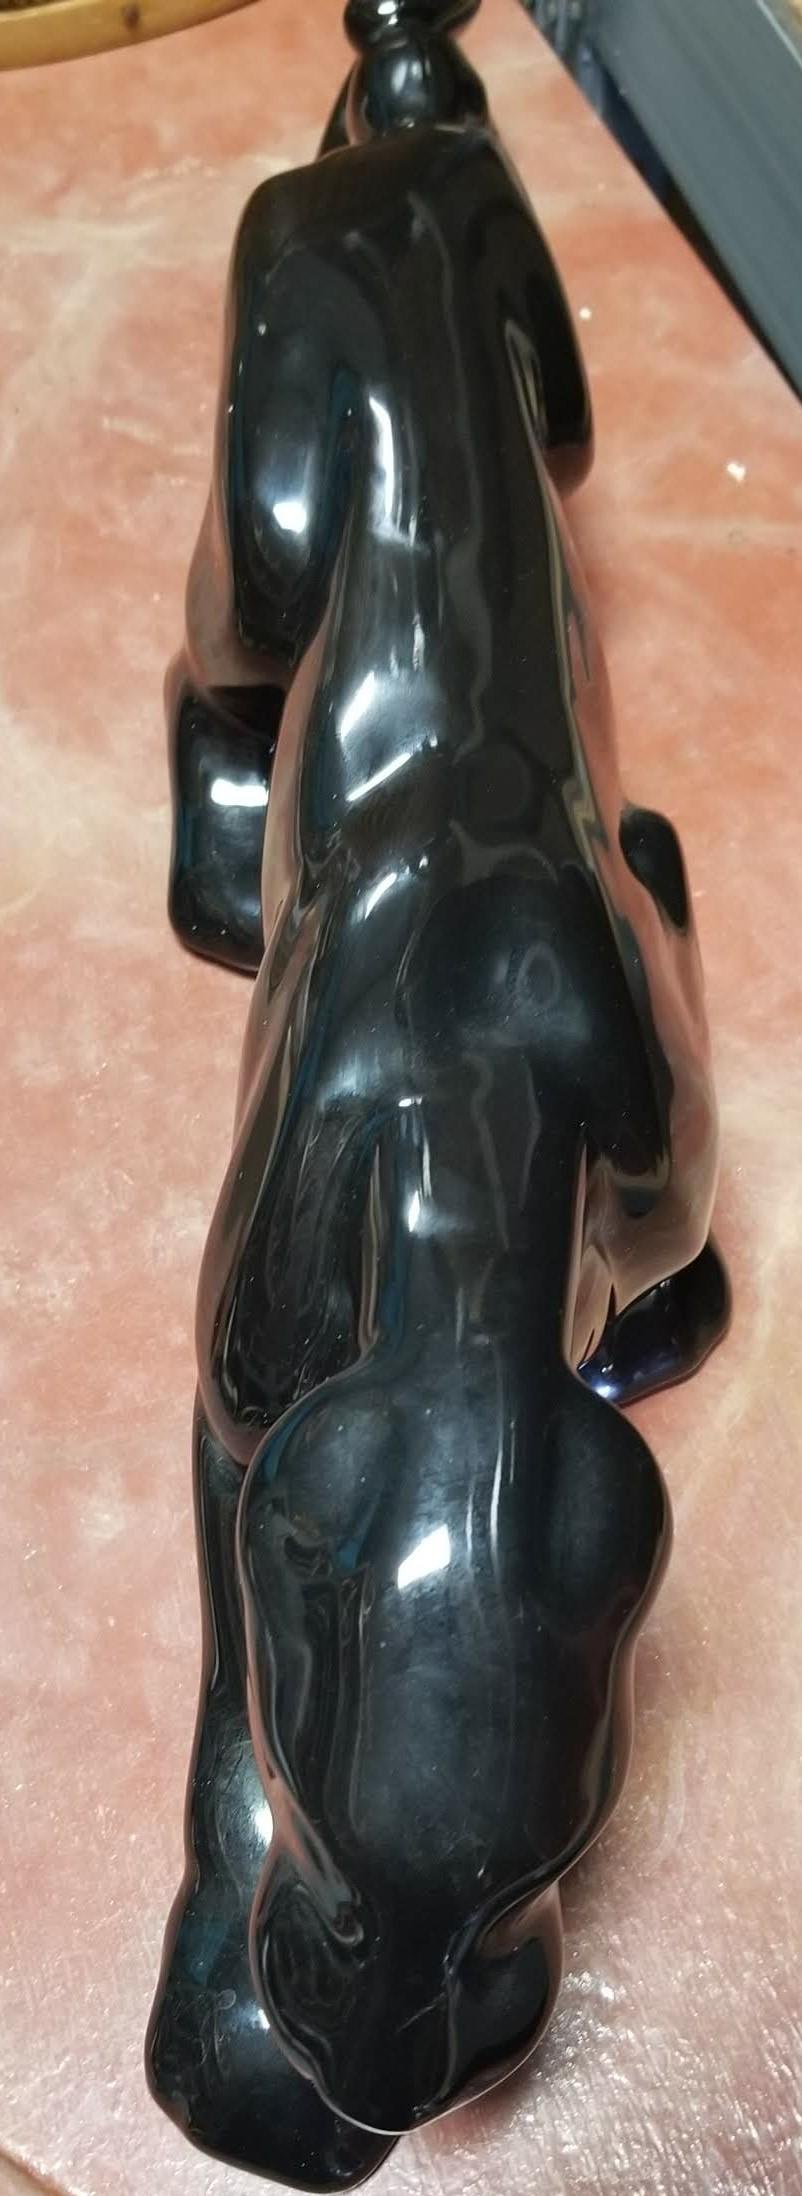 The stalking panther theme was one of the most popular subjects for Mid-Century TV Lamps and other decorative porcelain objects d'arte. This piece is a stand-alone statuette, finished in a high-gloss black glaze. It's slender enough to prowl happily